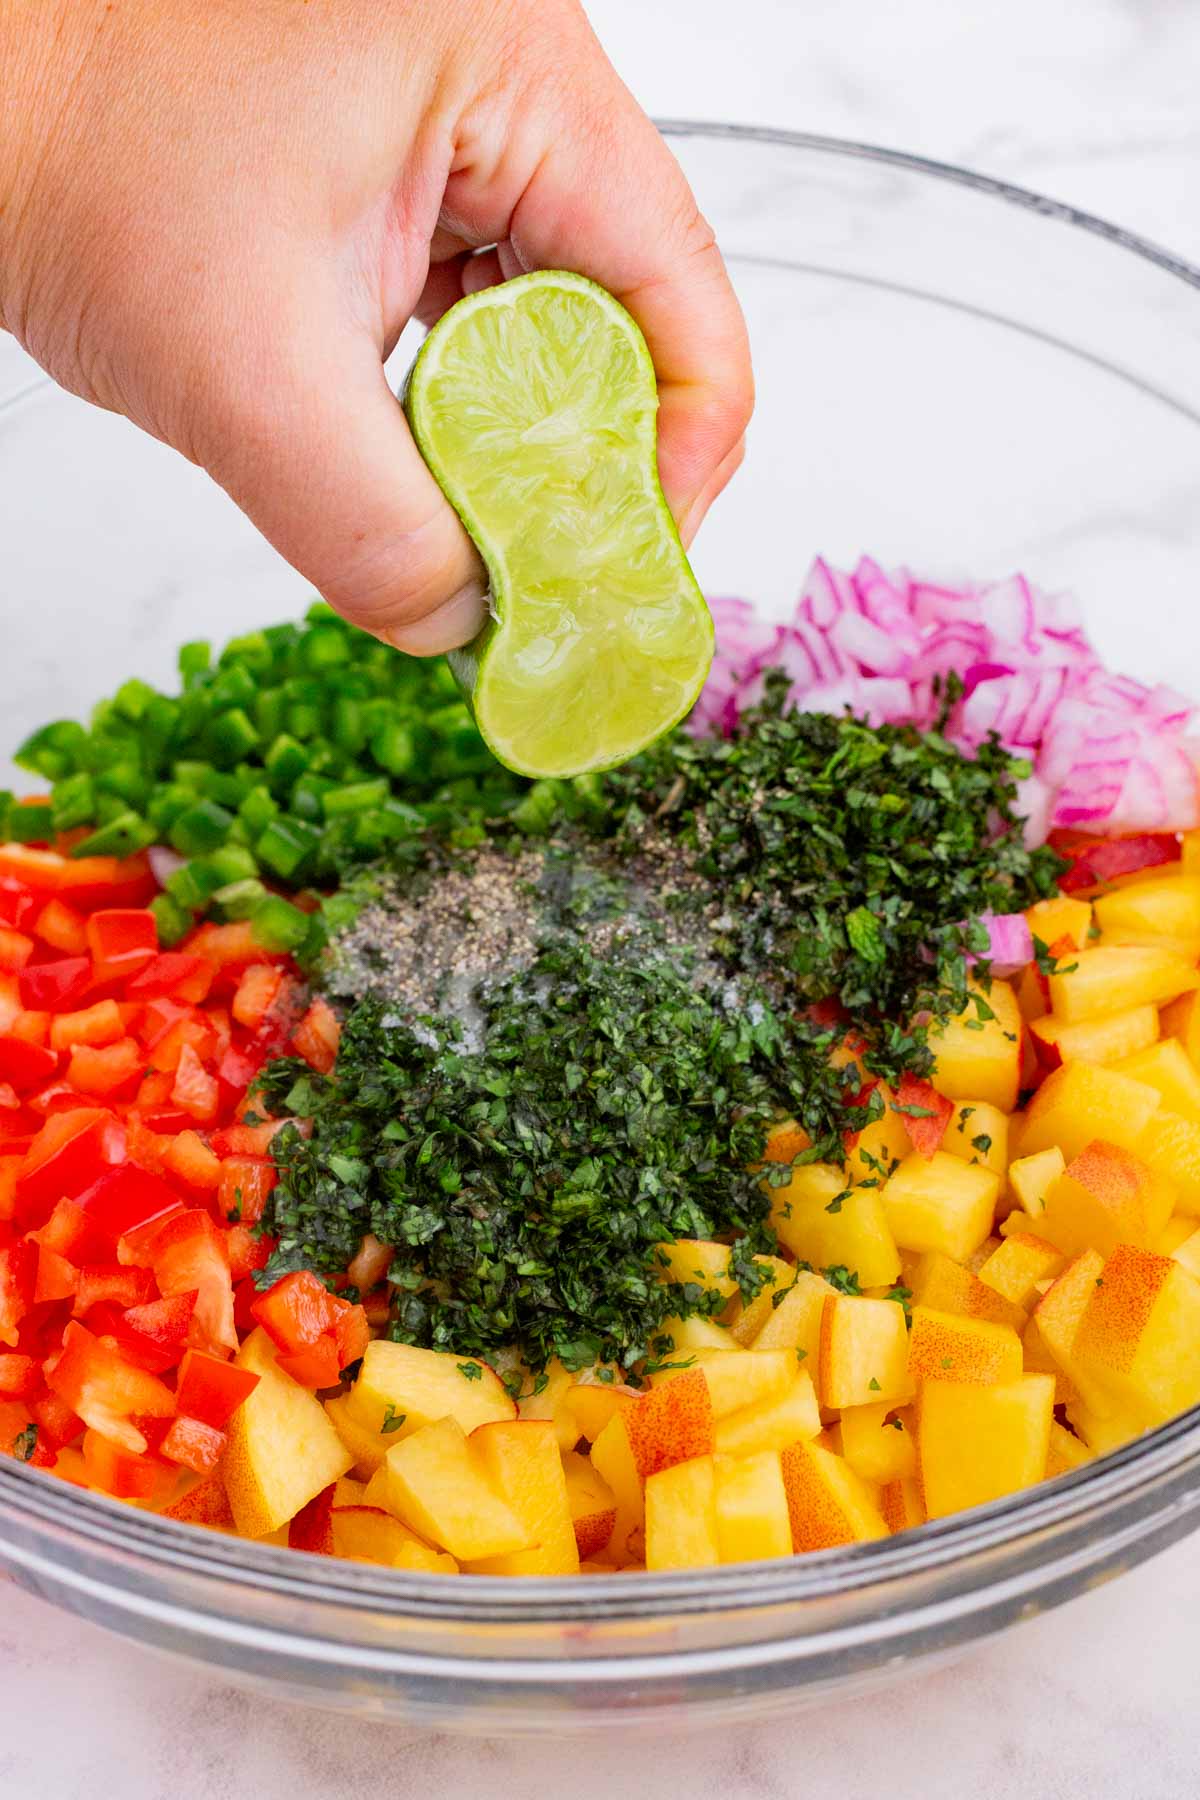 Lime juice is squeezed over the salsa ingredients.